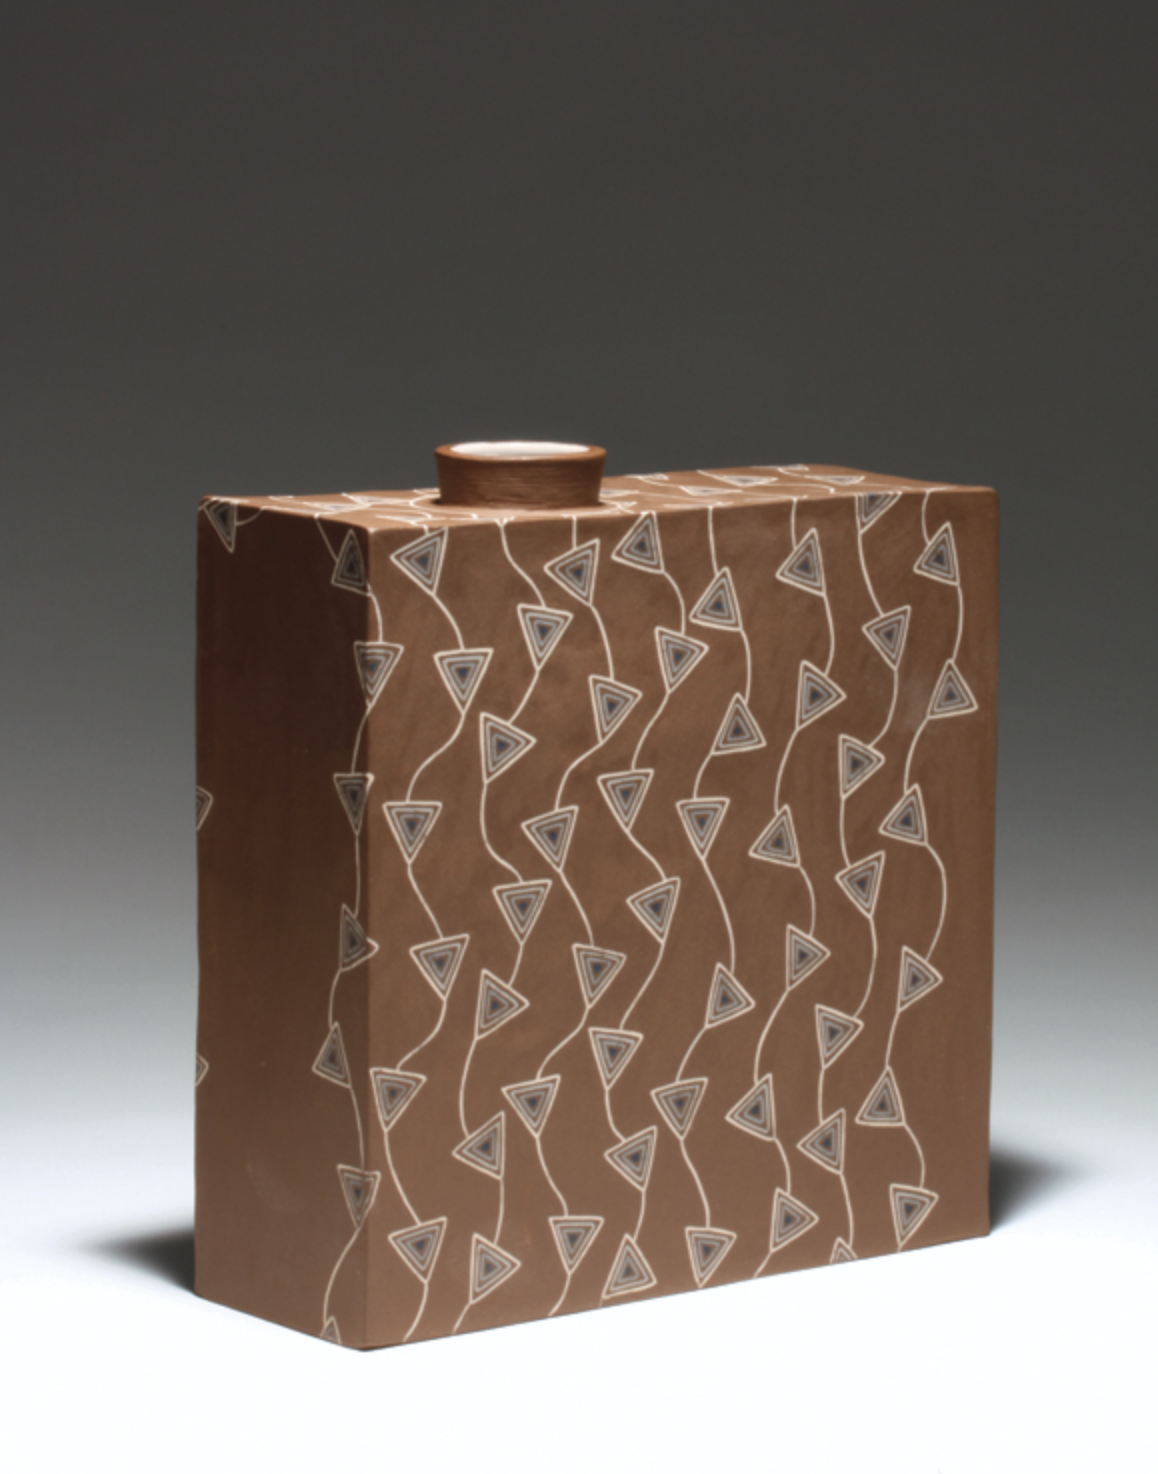 Flower Vase, 9½ in. (24 cm) in length, brown stoneware, glaze, fired to cone 5, 2016.